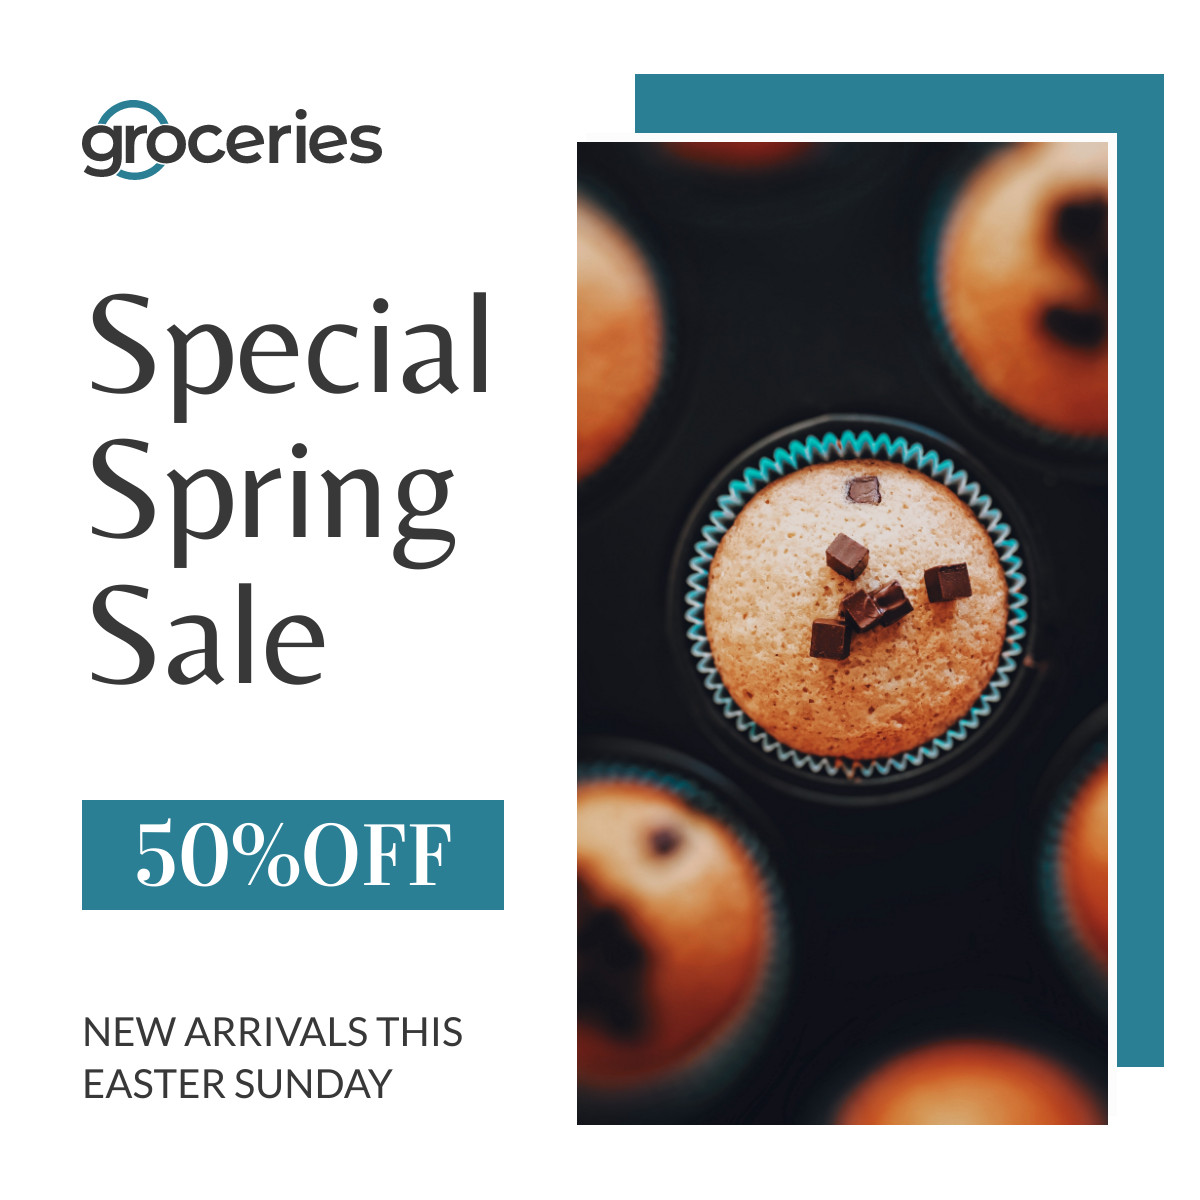 Special Muffin Spring Easter Sale Responsive Square Art 1200x1200